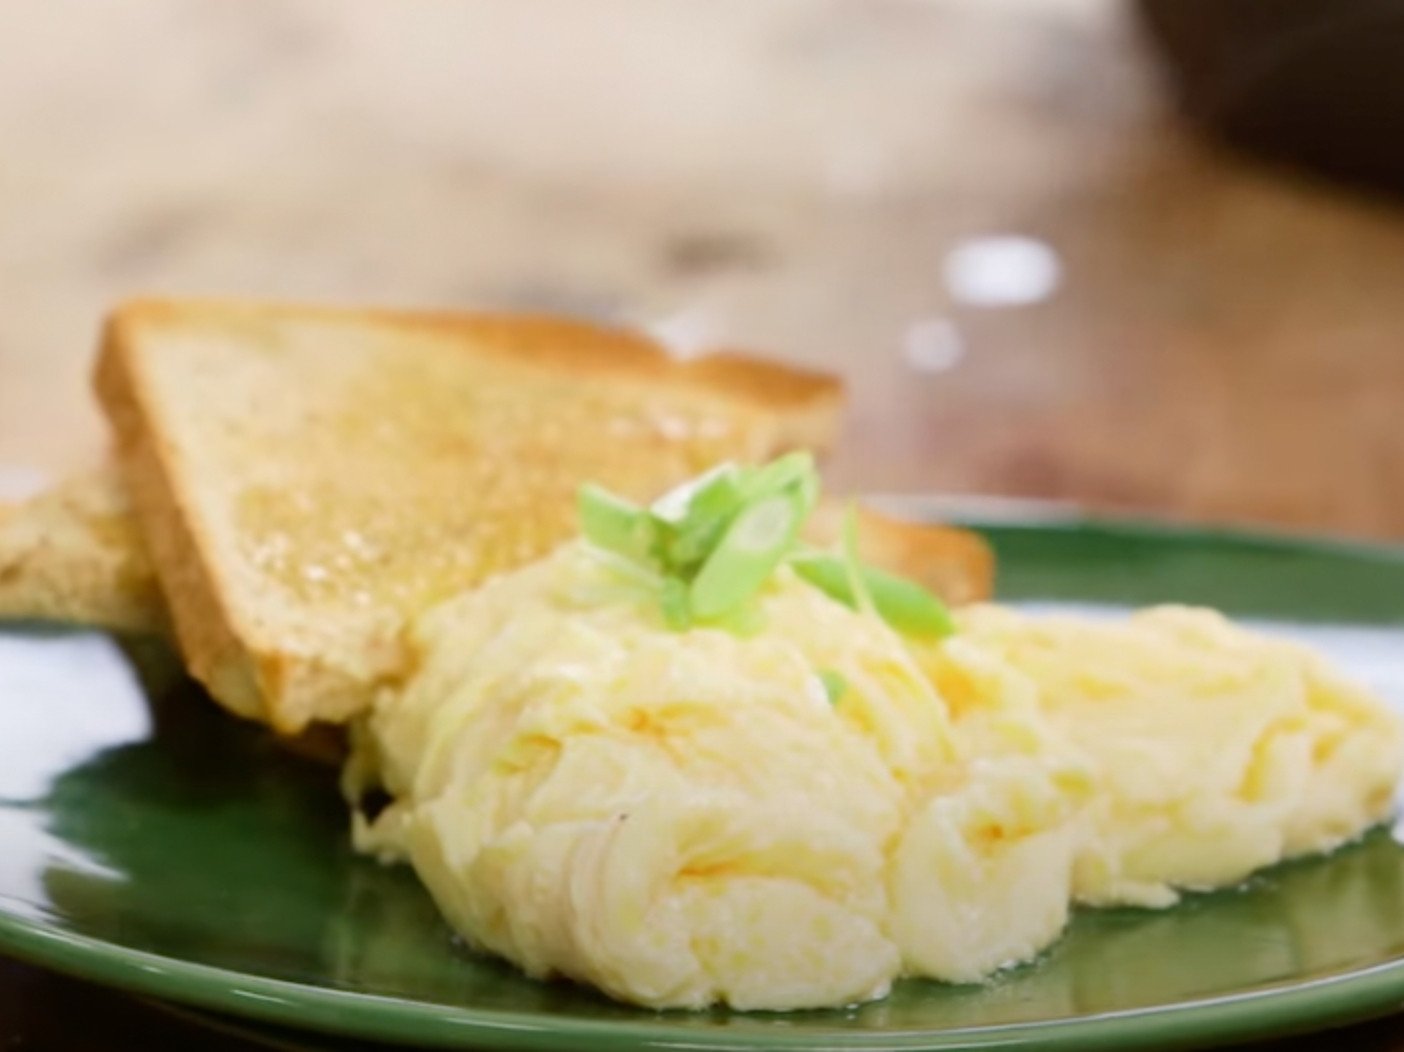 After Learning To Make Poached Scrambled Eggs, I’m Never Going Back